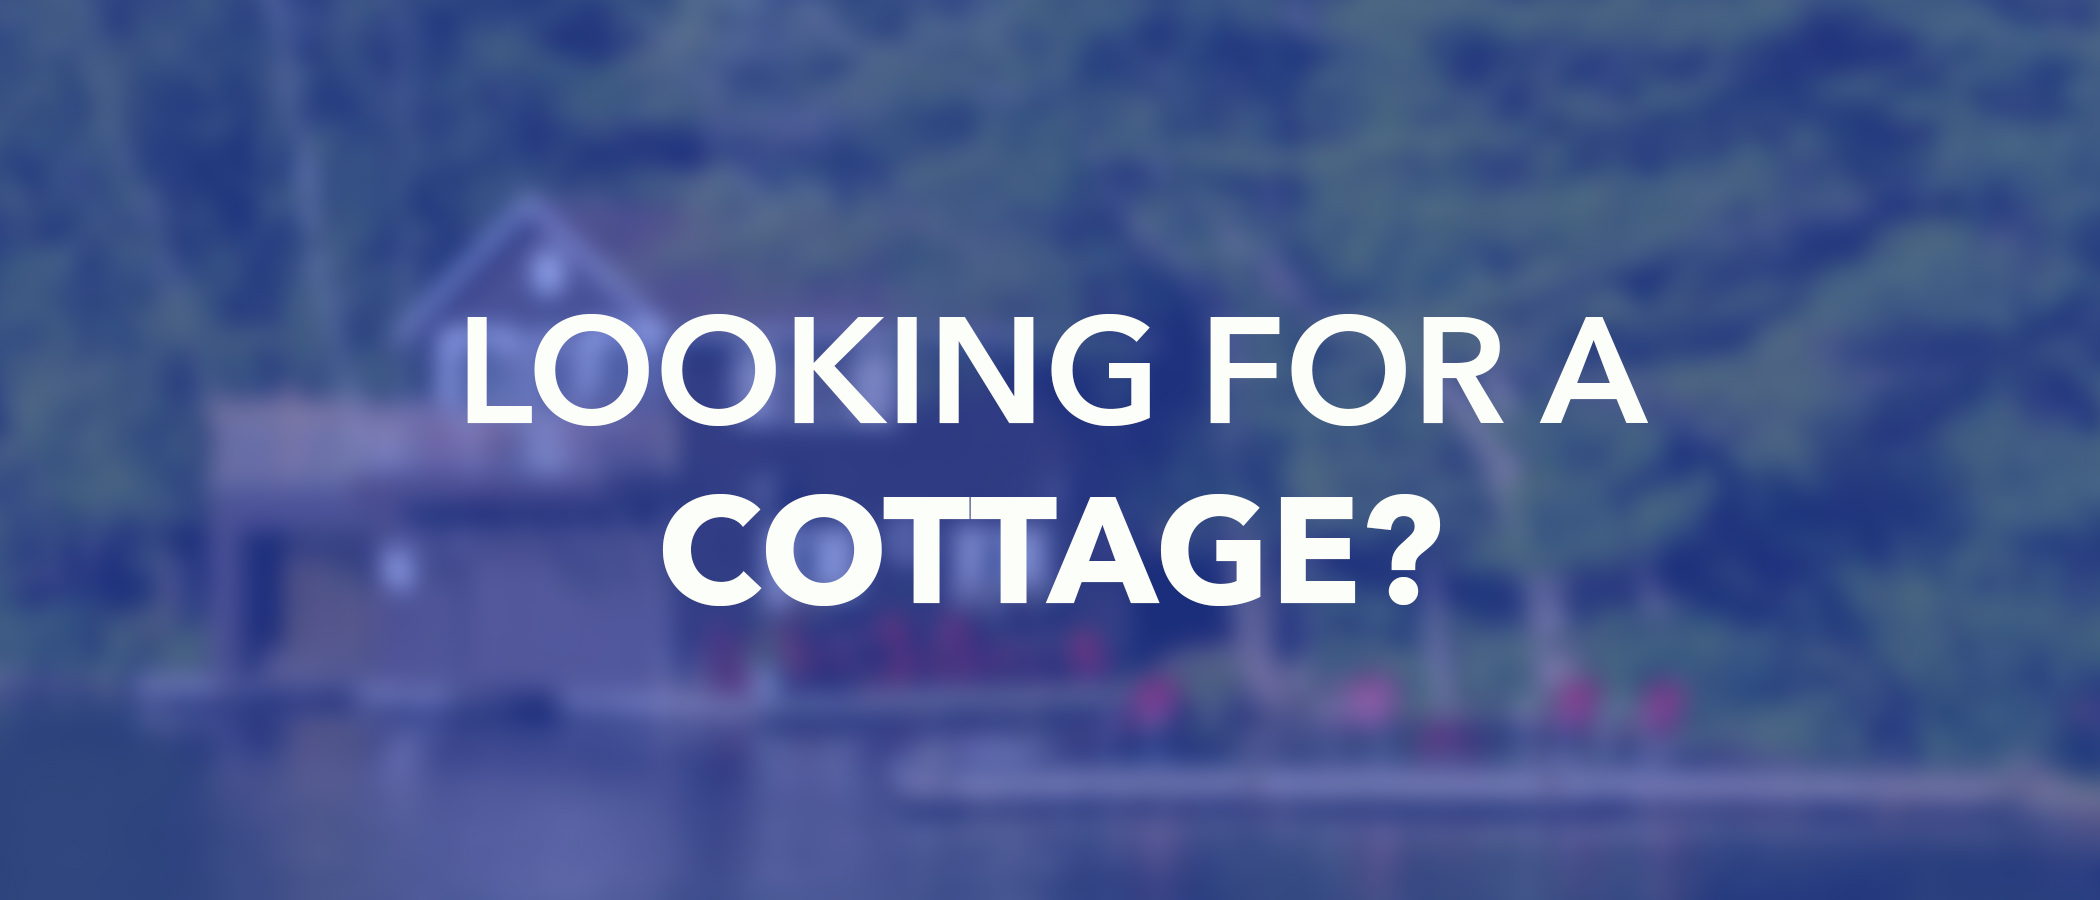 Looking For-Banner-cottage